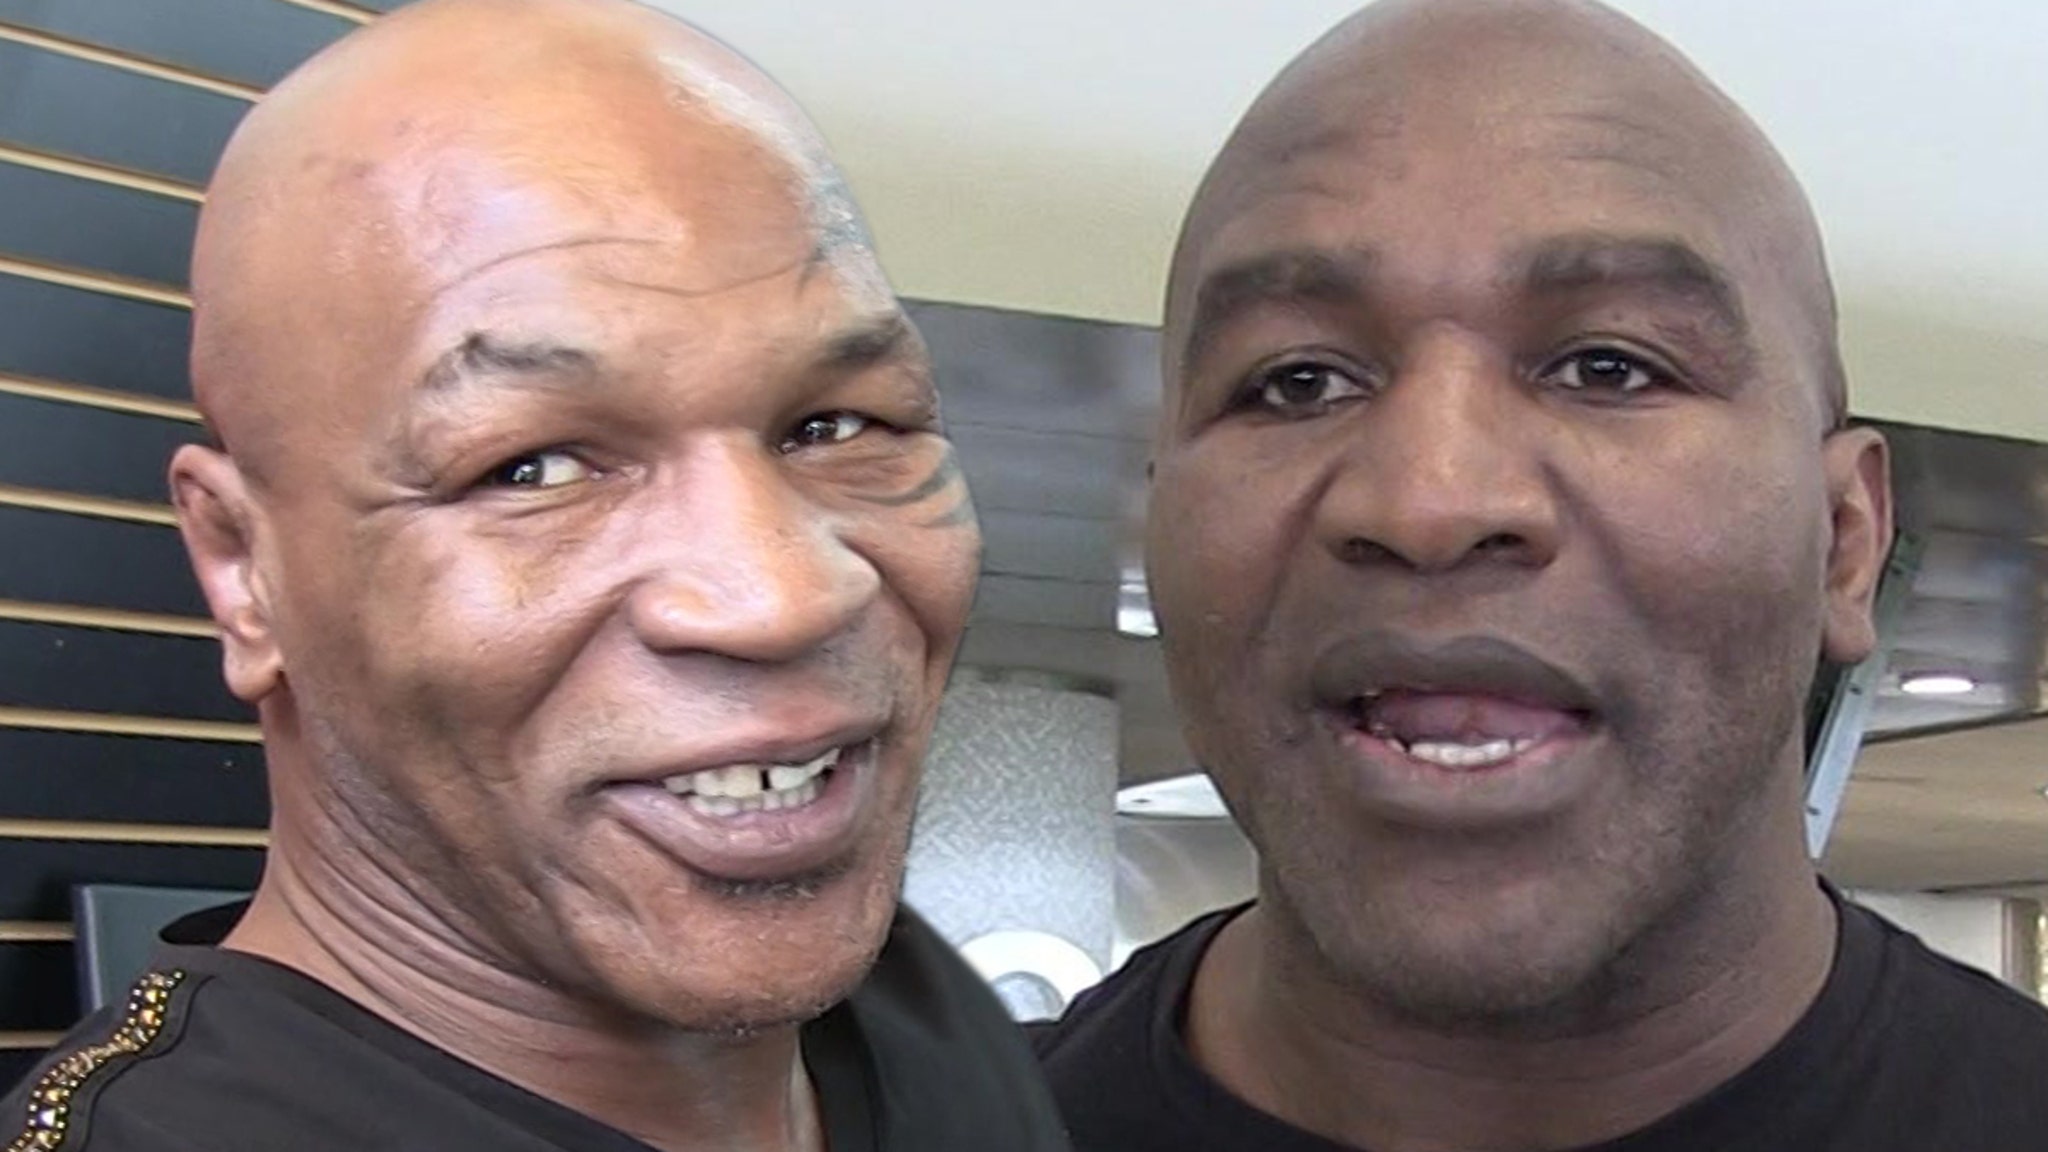 Mike Tyson says the fight with Evander Holyfield is officially activated for May 29